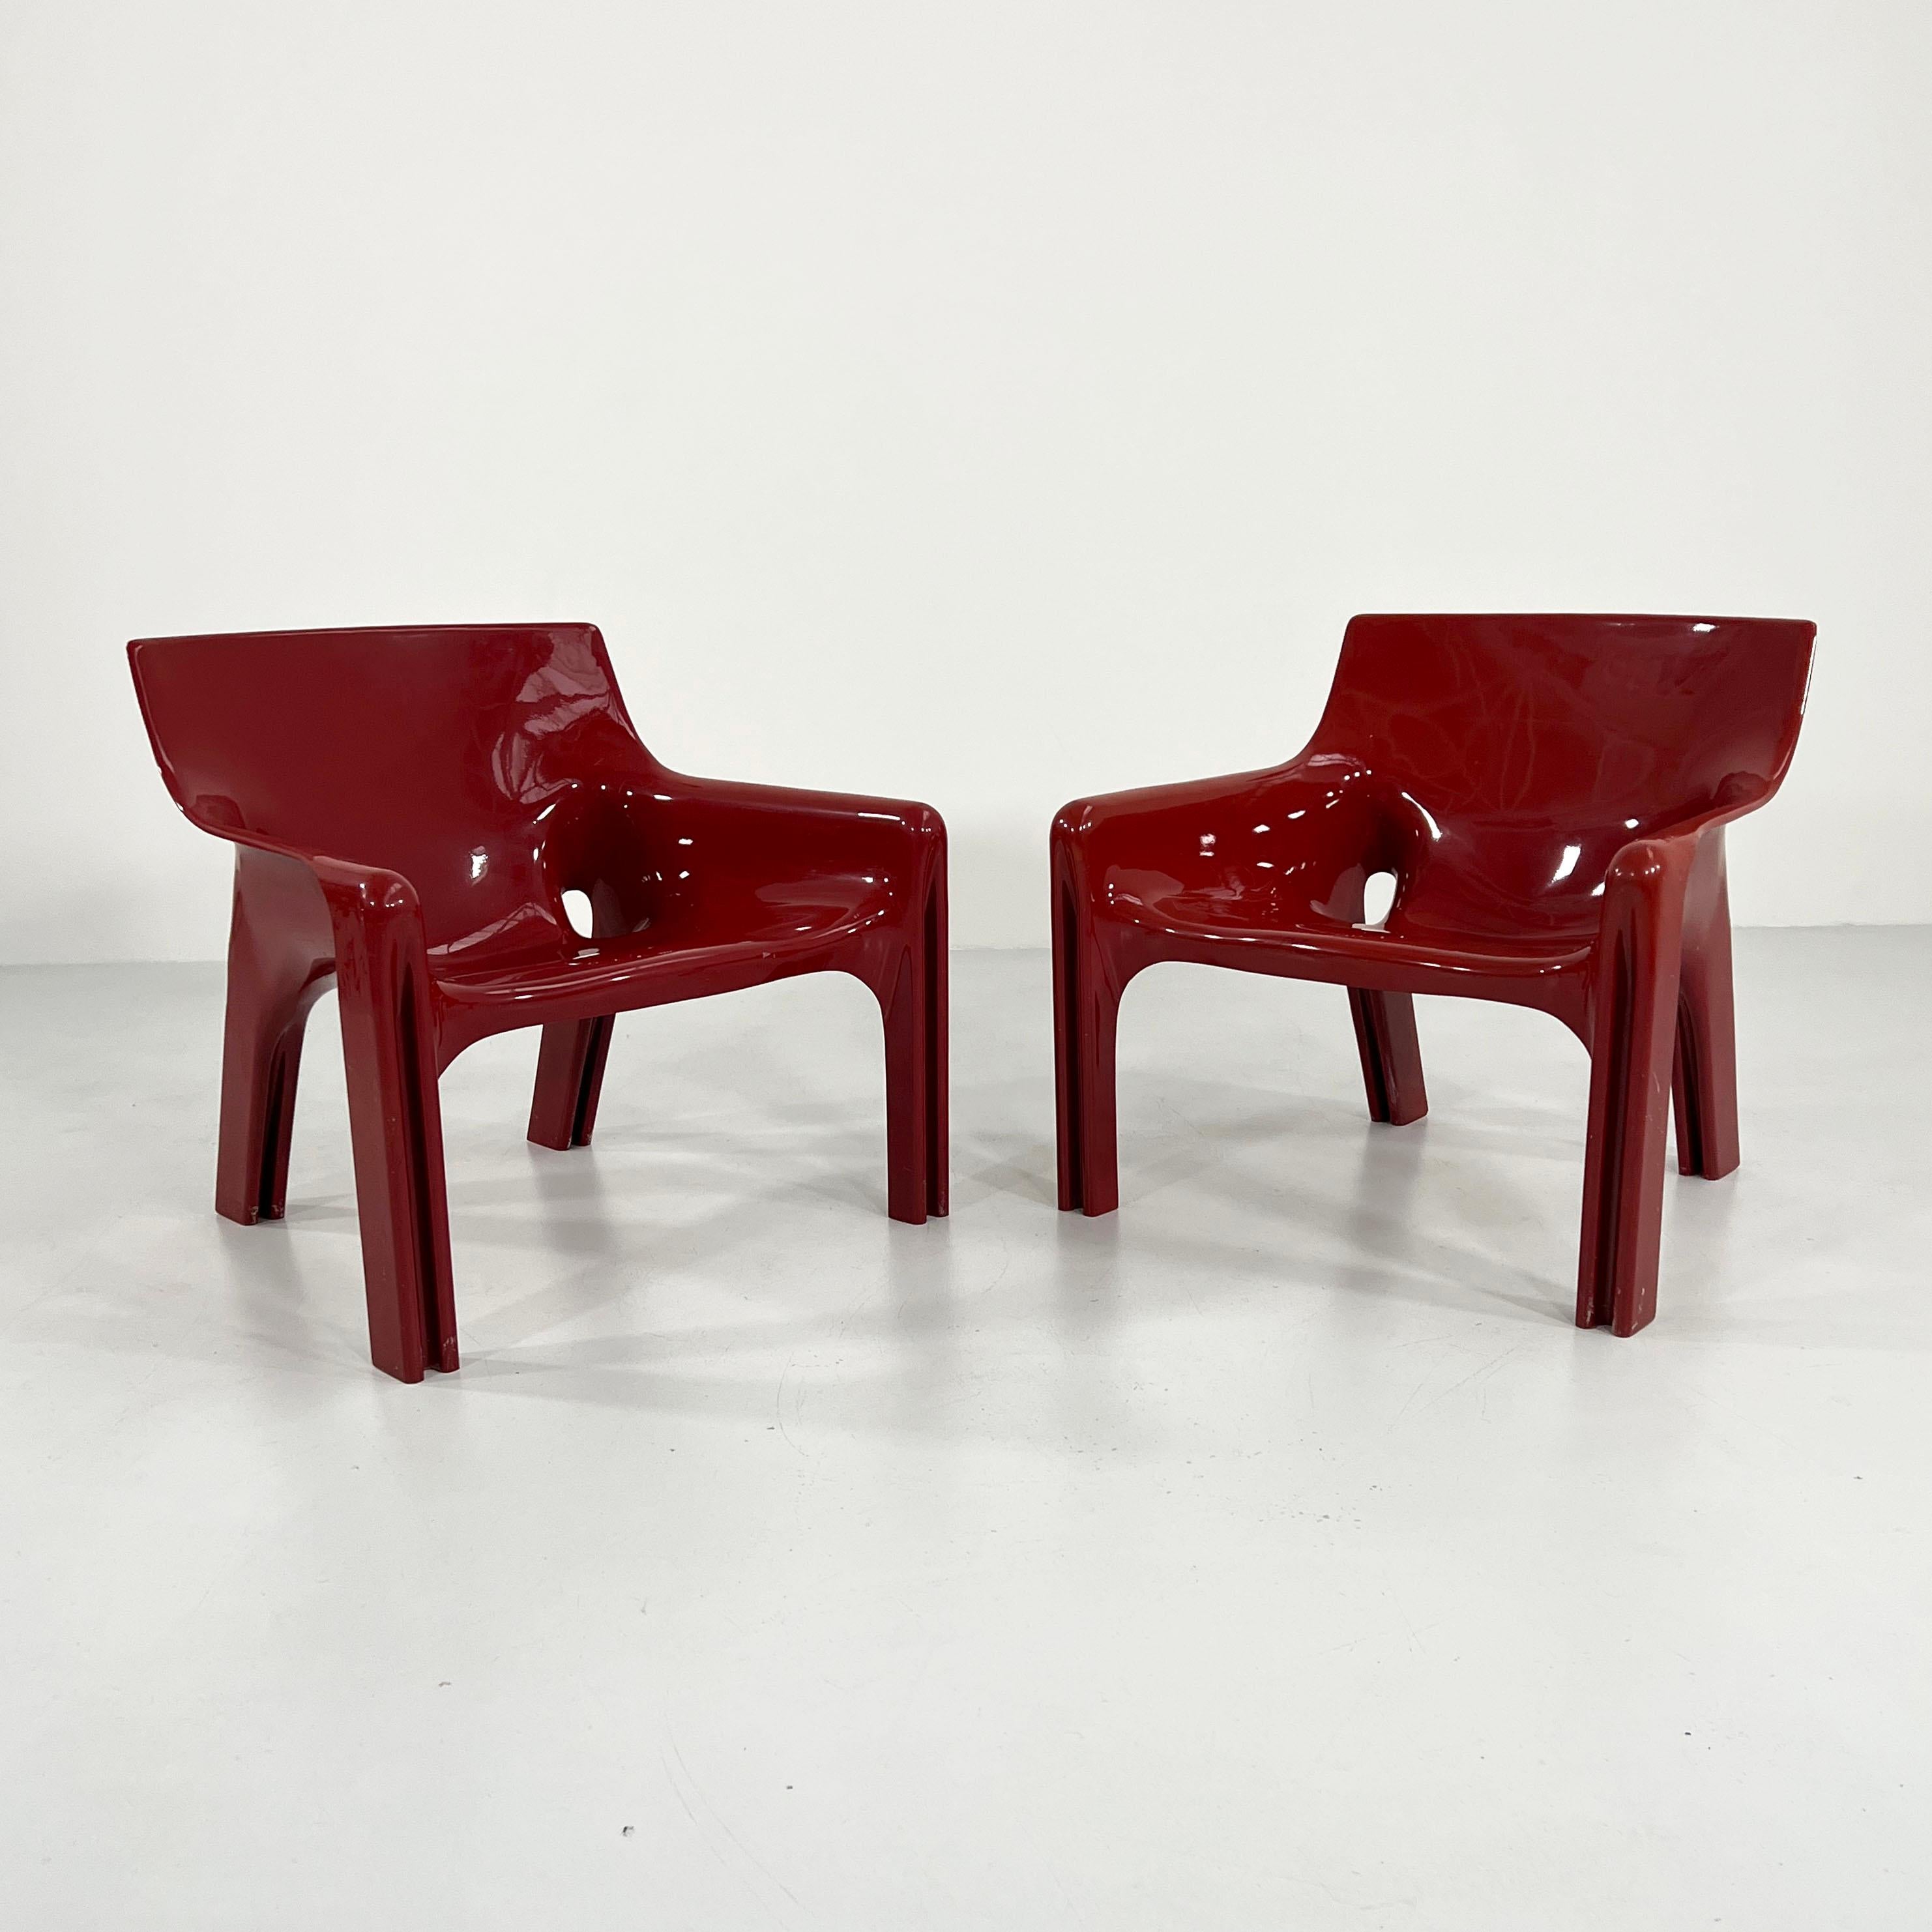 Italian Pair of Burgundy Vicario Lounge Chair by Vico Magistretti for Artemide, 1970s